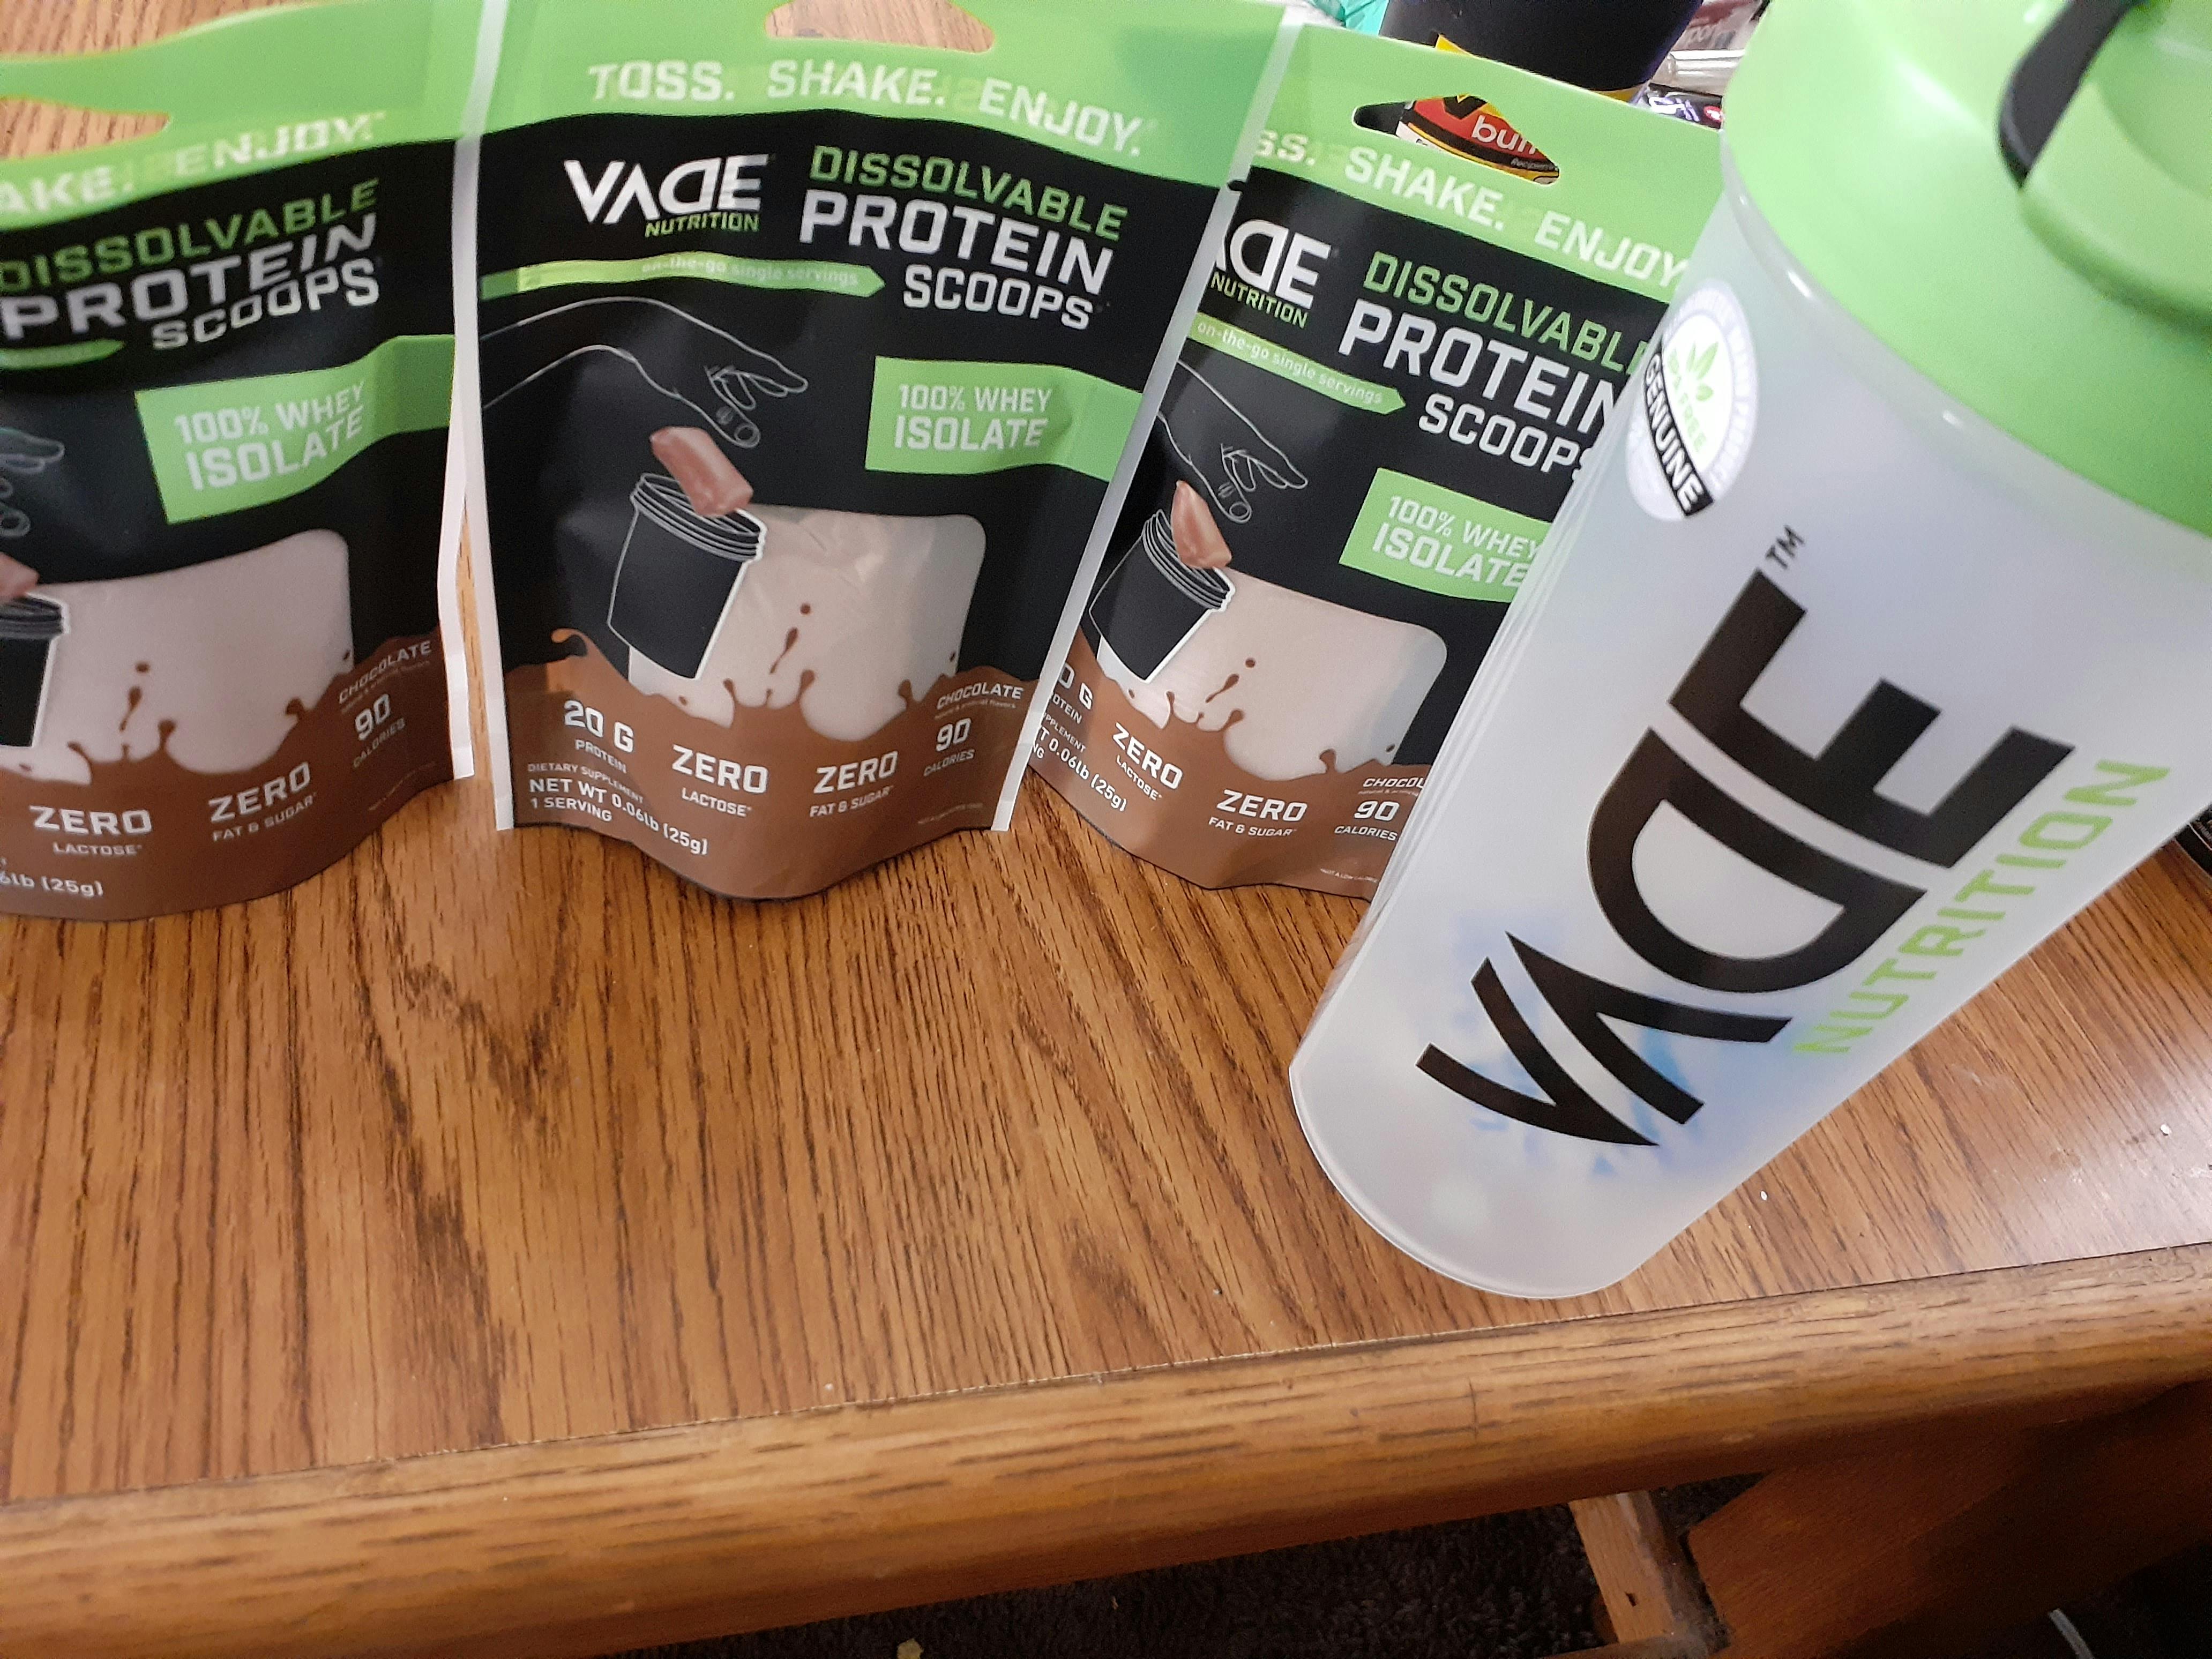 Vade Nutrition Protein Taste Test and Review - Applaudable Media